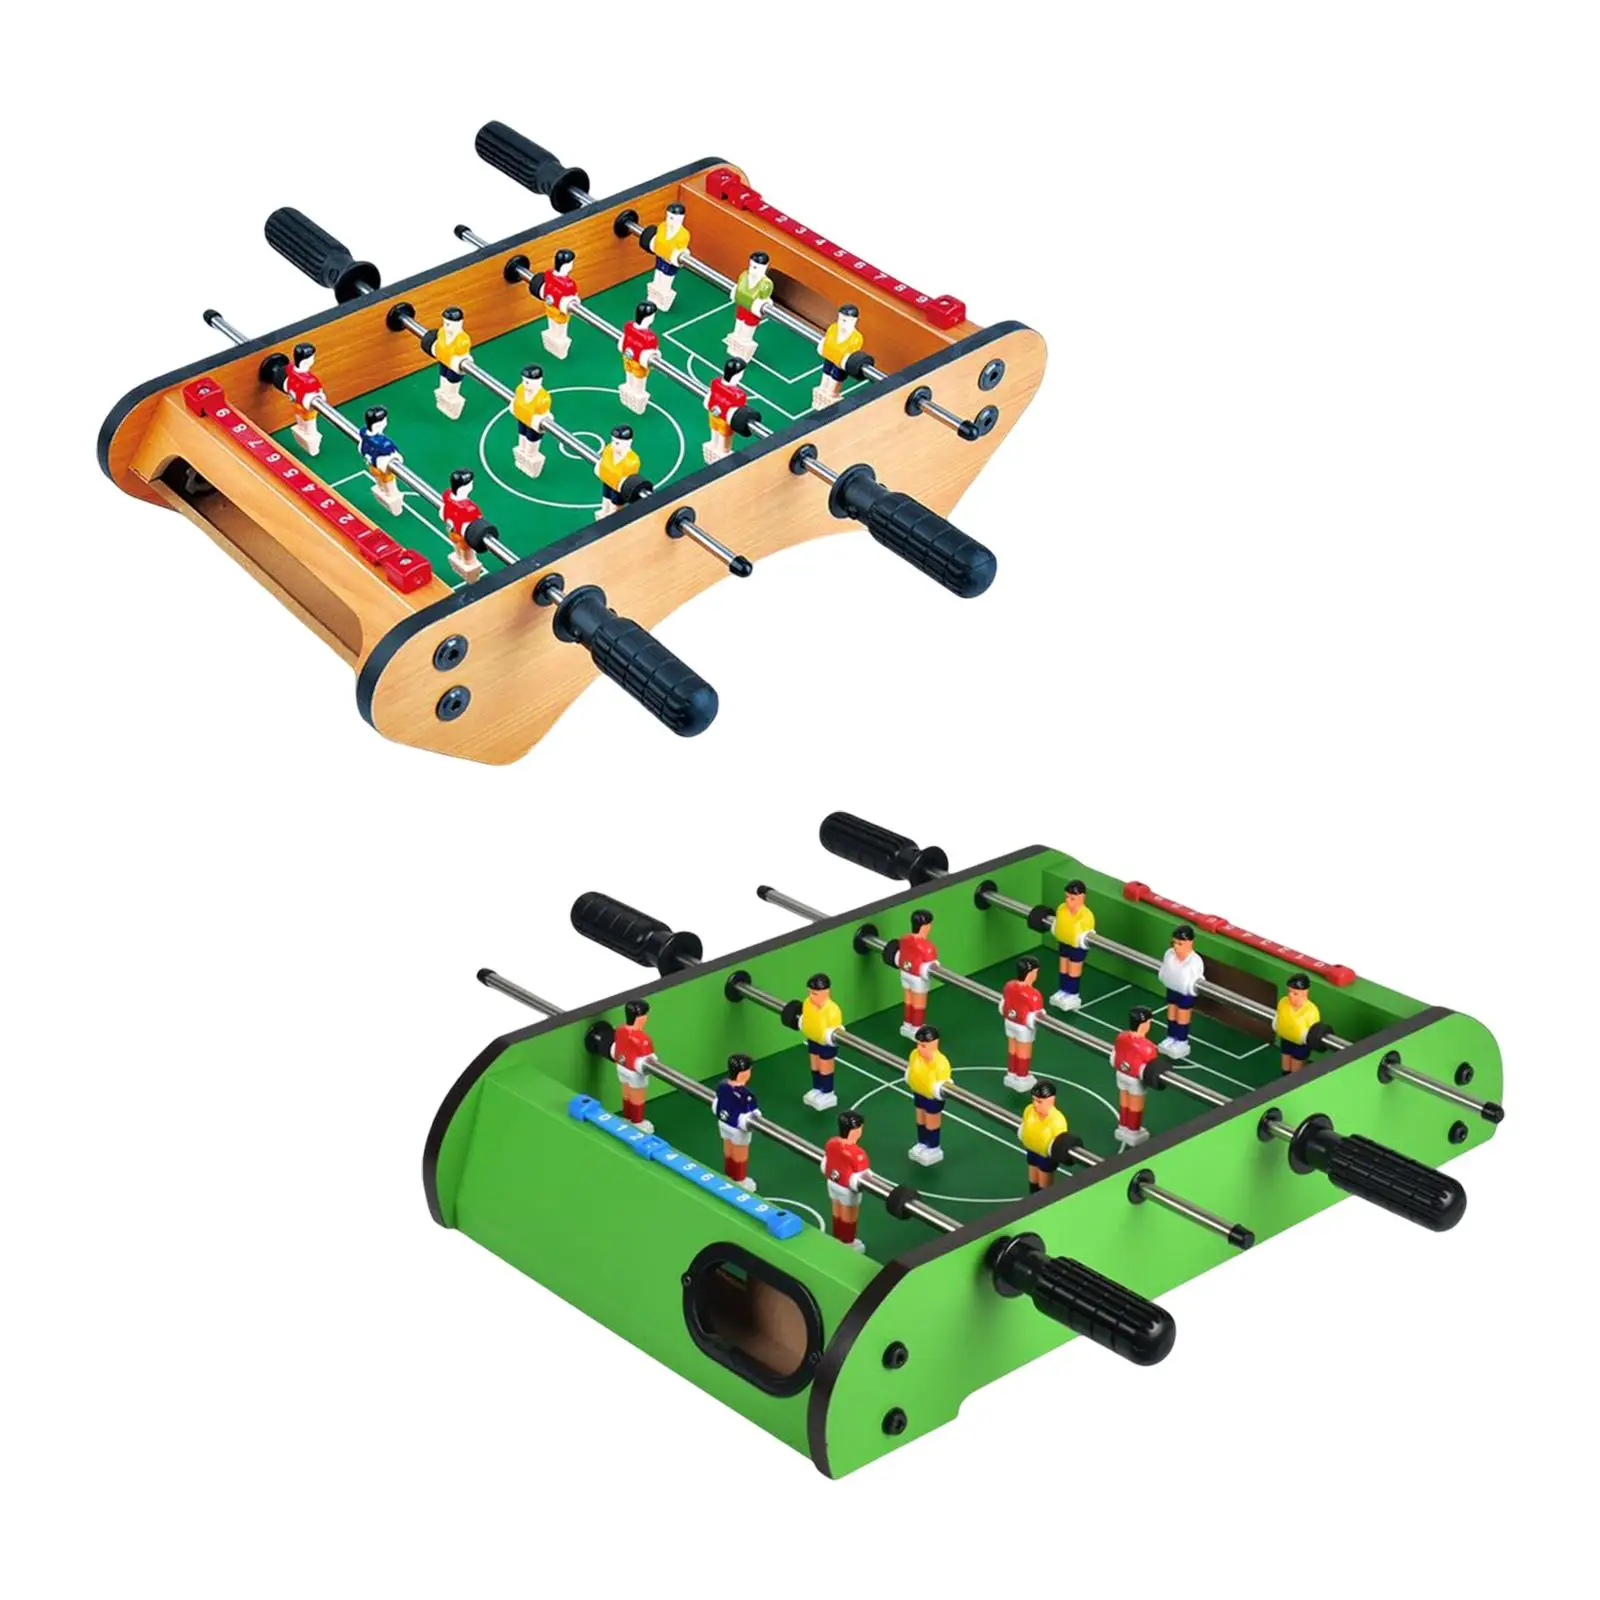 Tabletop Football Soccer Pinball Games with Ball Interesting Desktop Game for Travel